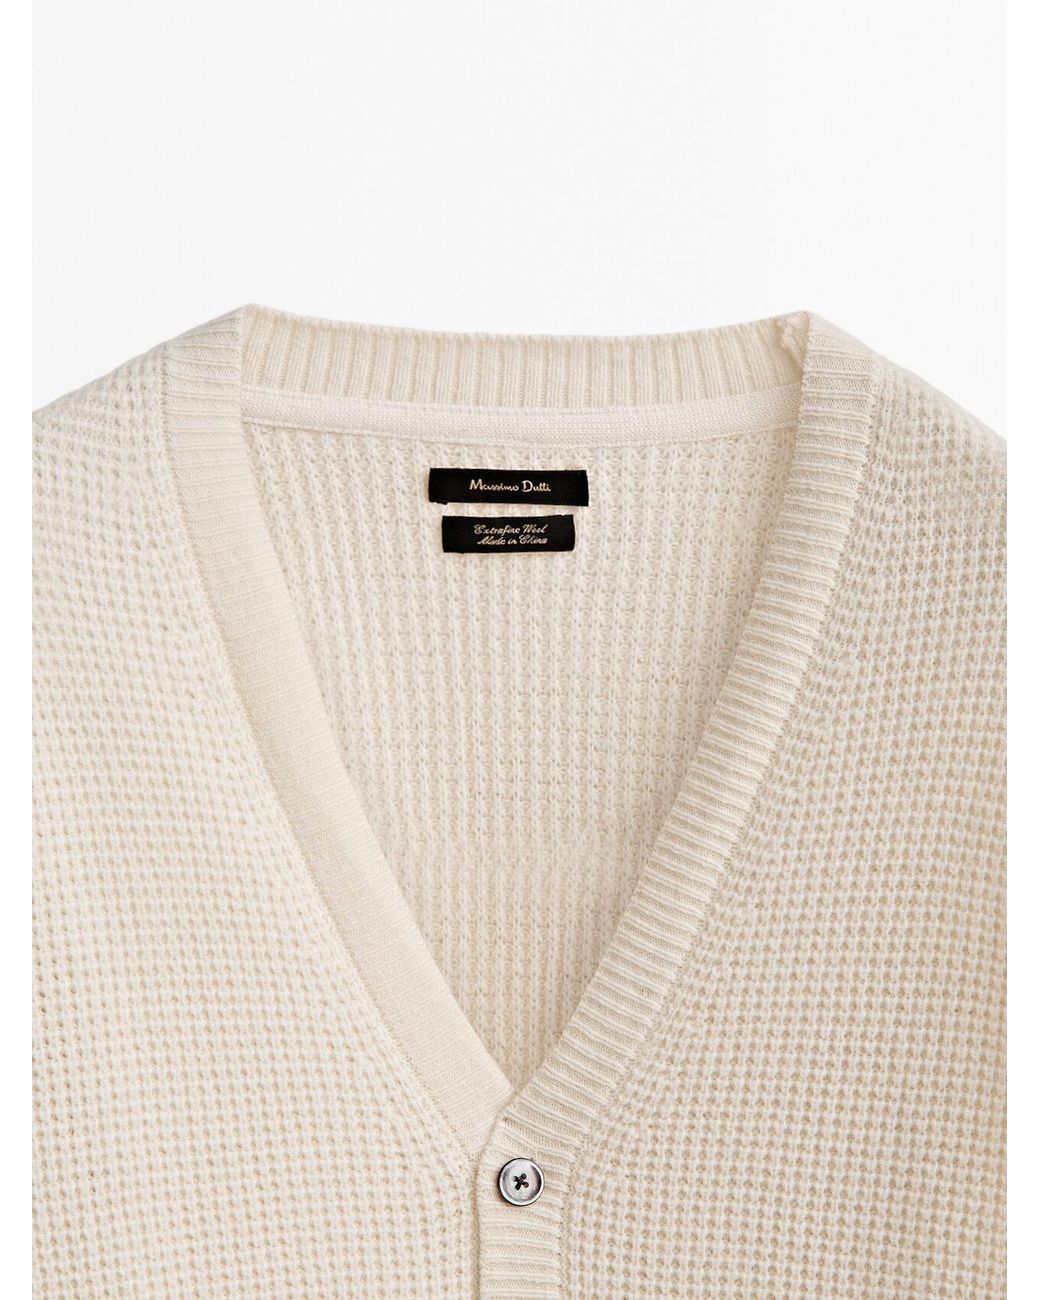 MASSIMO DUTTI Textured Wool Blend Cardigan in Natural for Men | Lyst